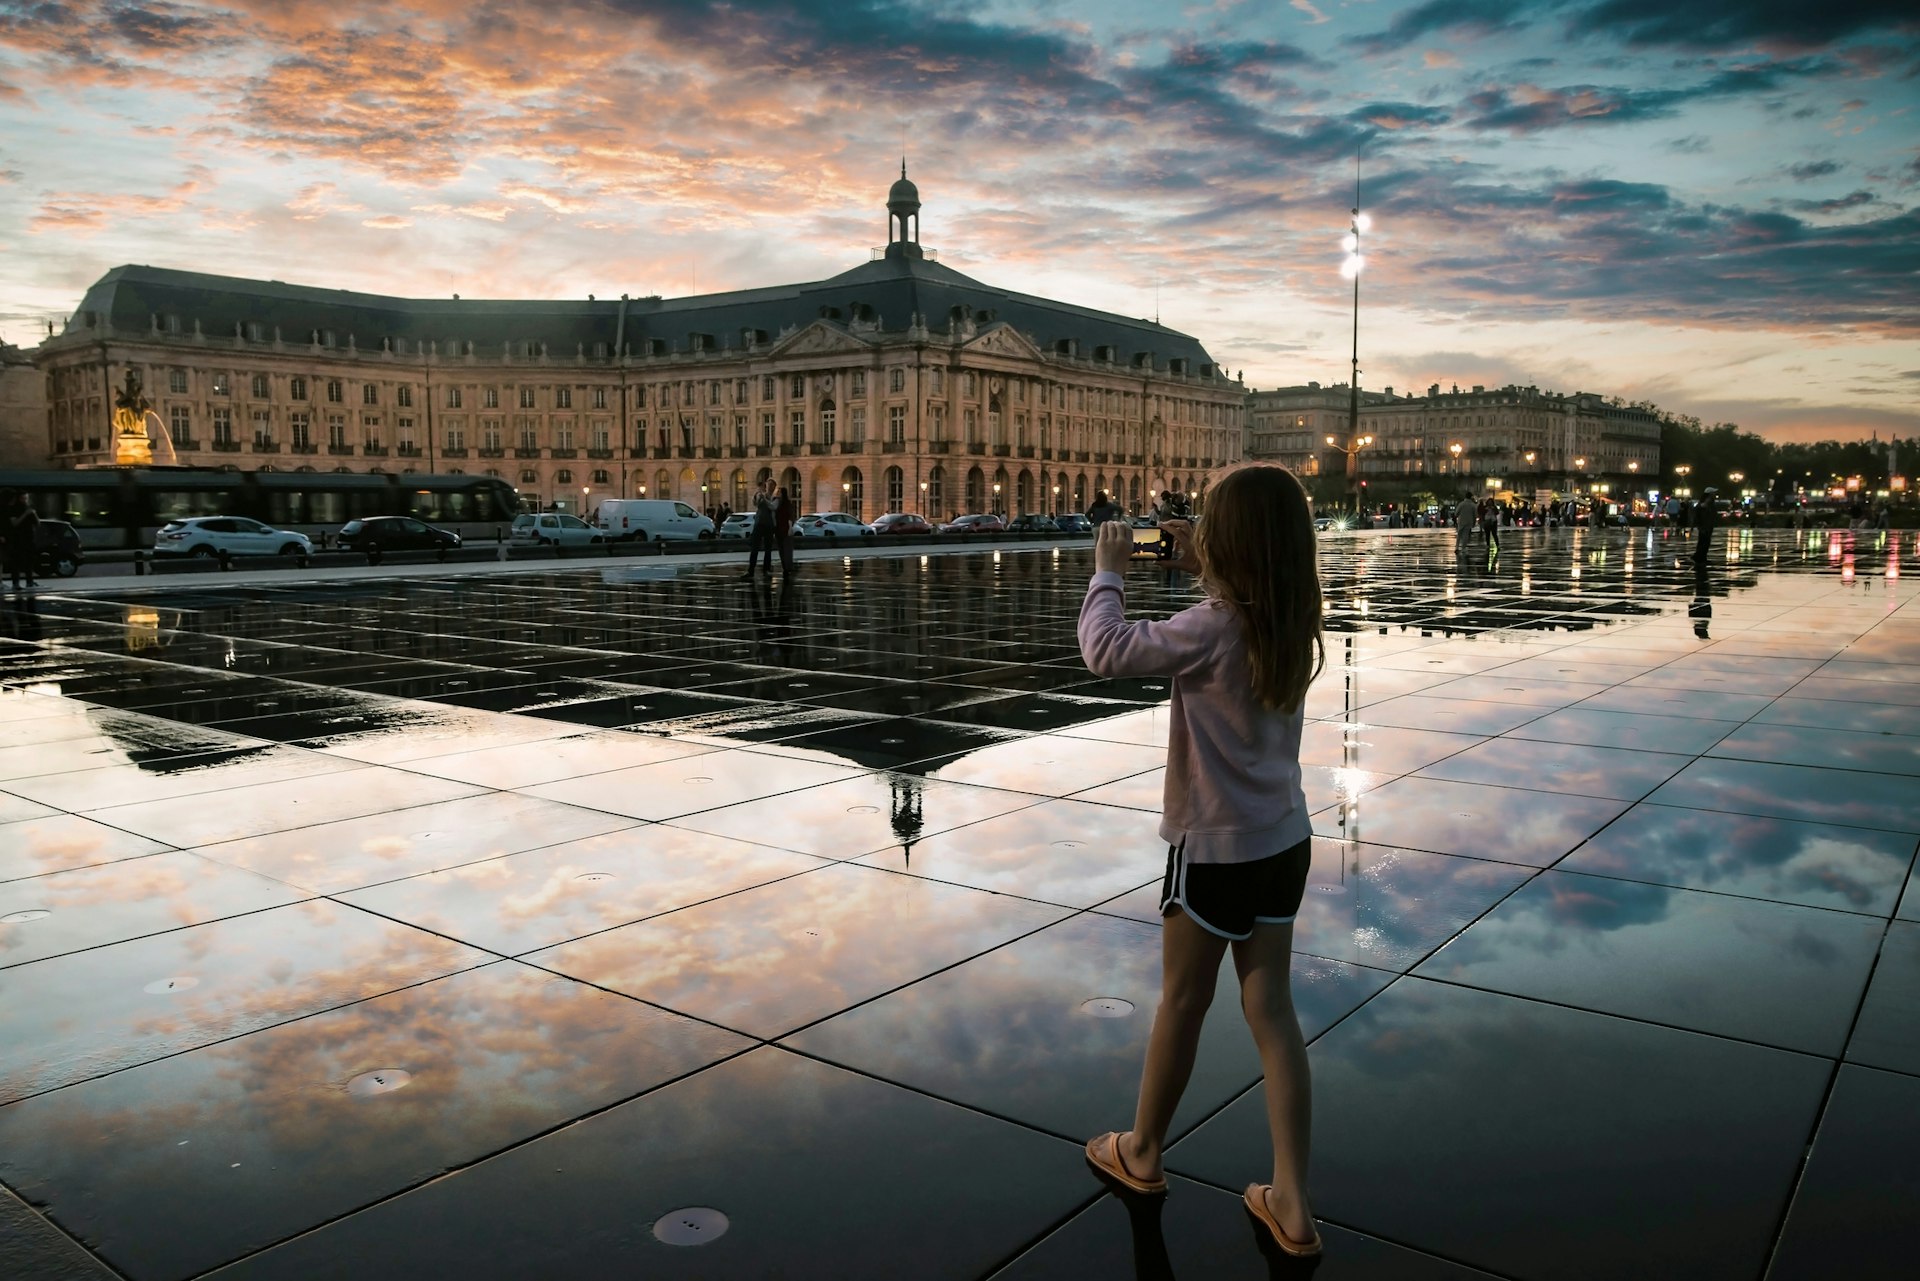 Young girl taking a photo of the famous Bordeaux water mirror with Place de la Bourse in the background at sunset